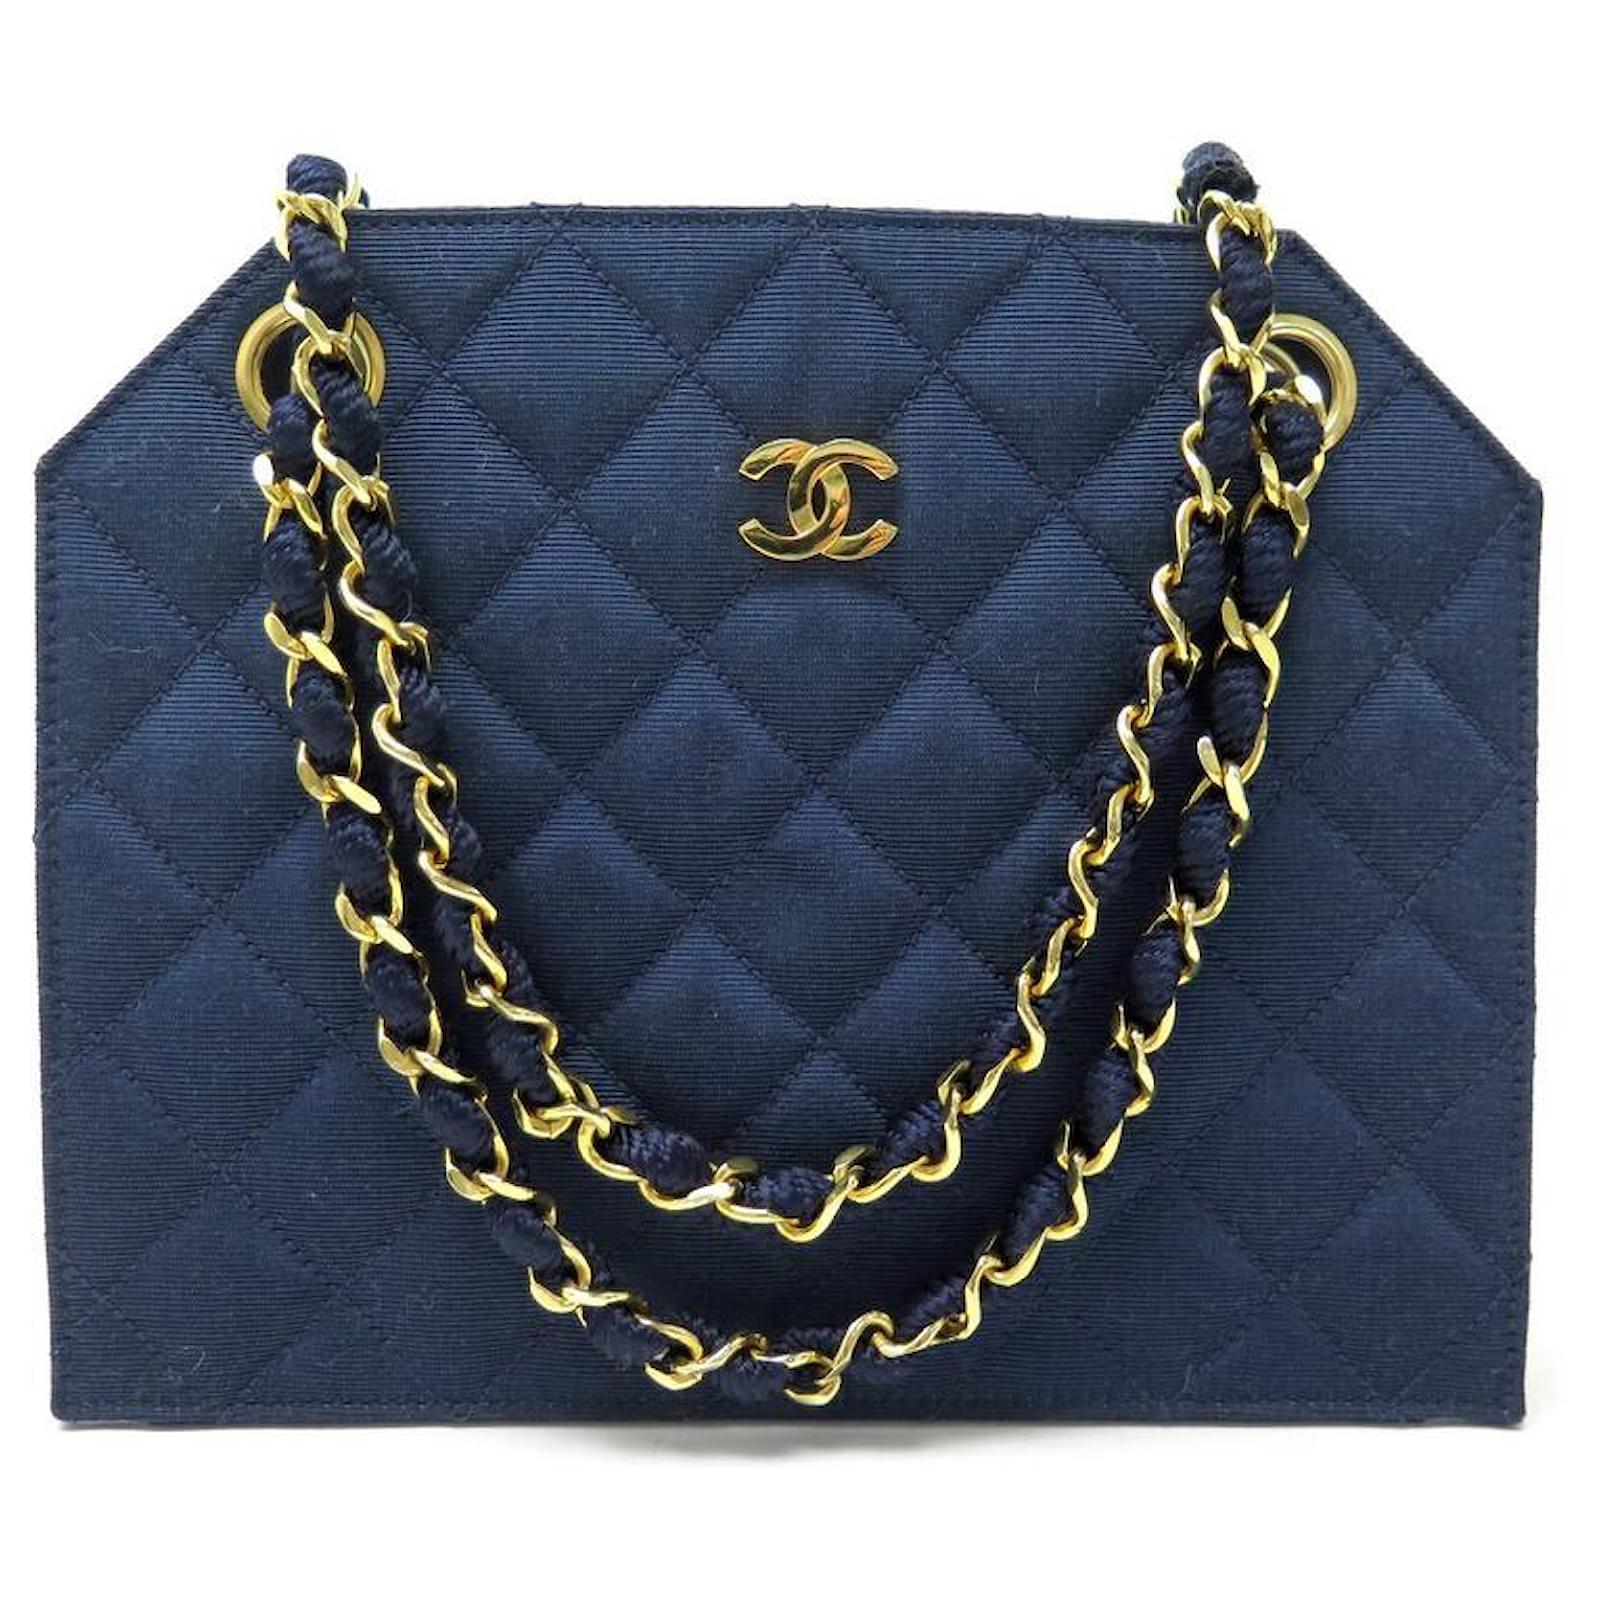 VINTAGE CHANEL HANDBAG 1986 IN QUILTED FABRIC GOLD CHAIN BANDOULIERE PURSE  Blue Cloth ref.383360 - Joli Closet